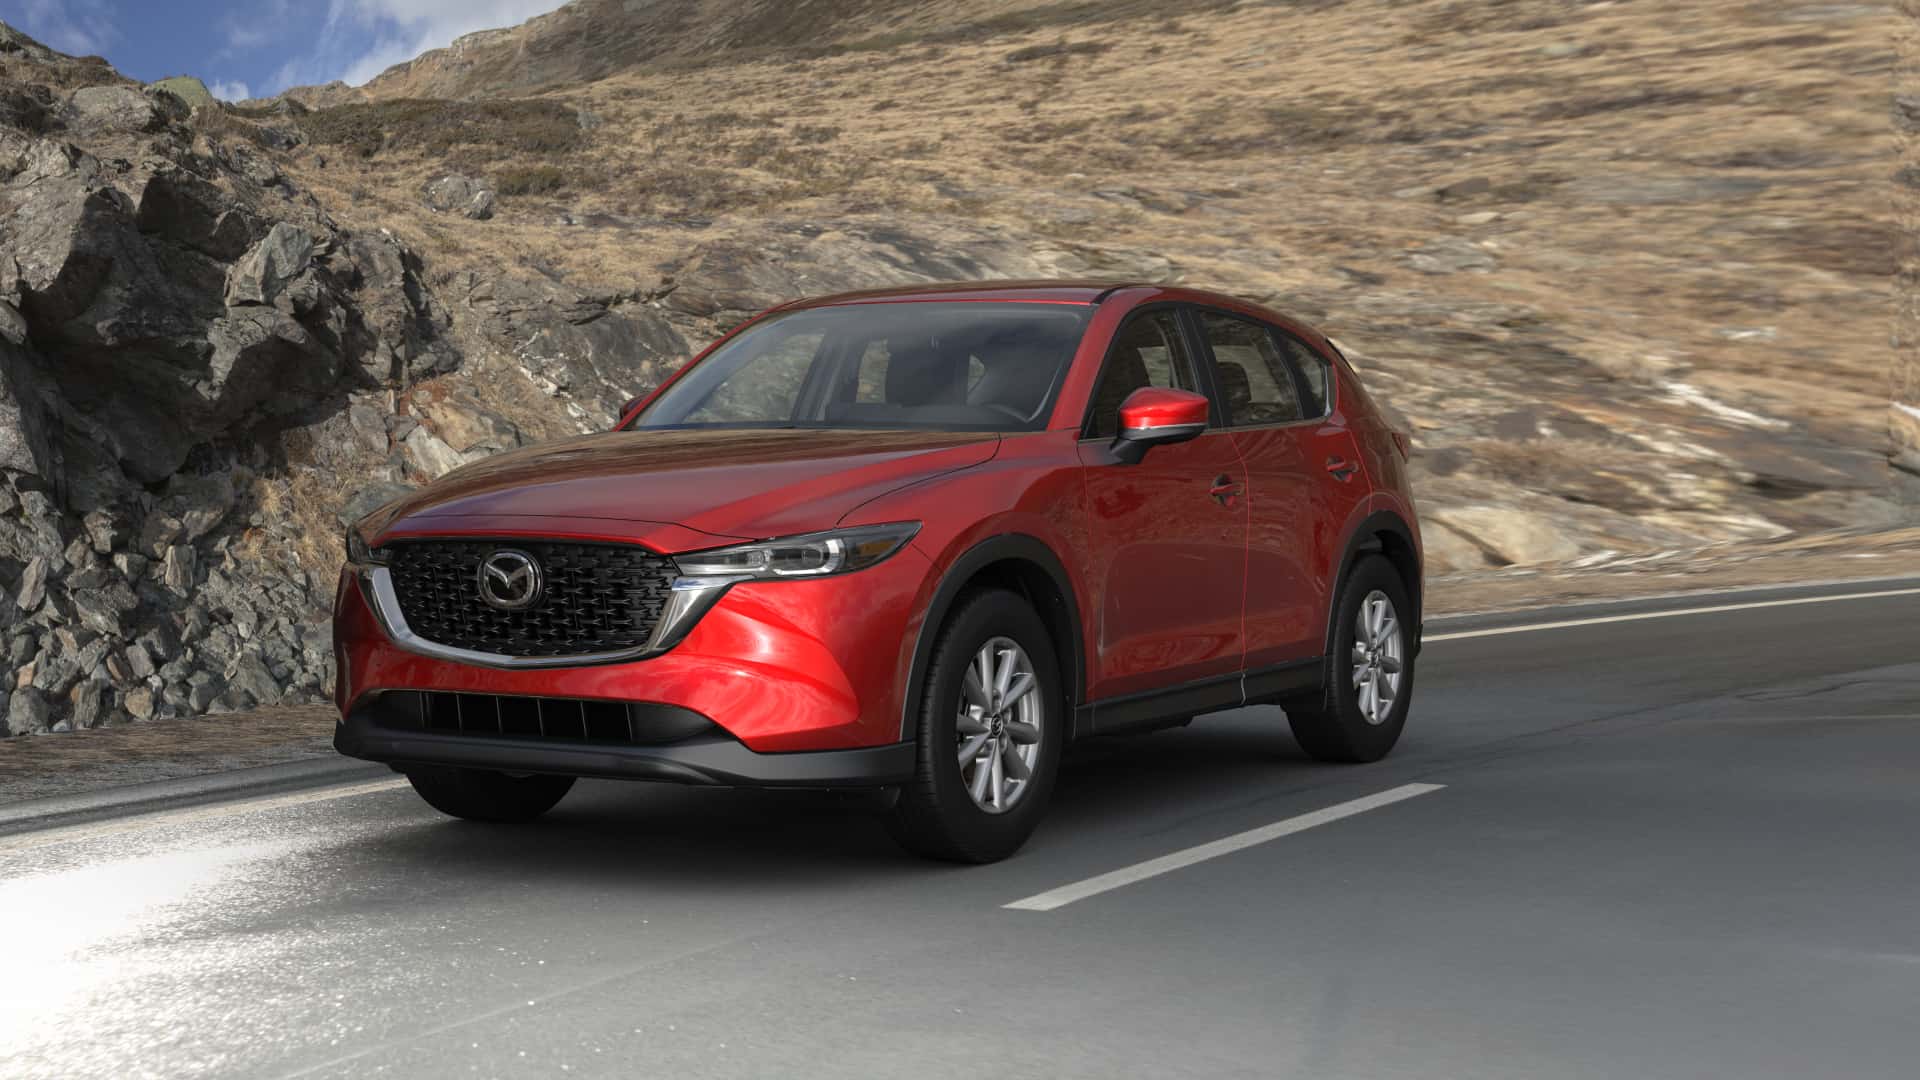 2023 Mazda CX-5 2.5 S Soul Red Crystal Metallic | Cook Mazda in Aberdeen MD